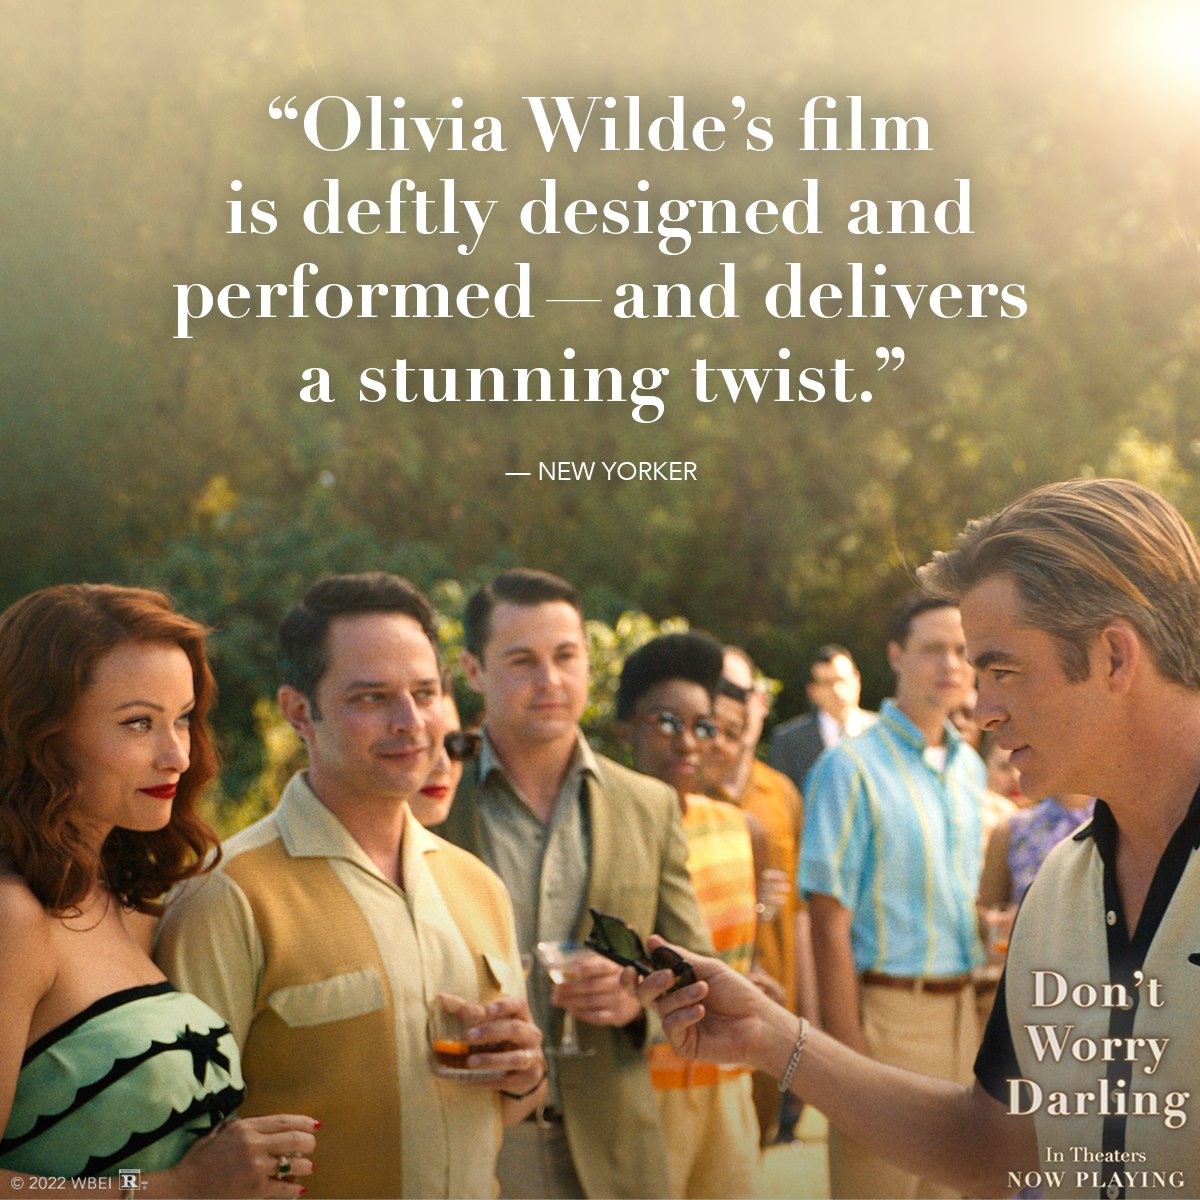 The vision is clear, #DontWorryDarling is “one of the best films of the year.” Get tickets NOW: bit.ly/3qFXCB6